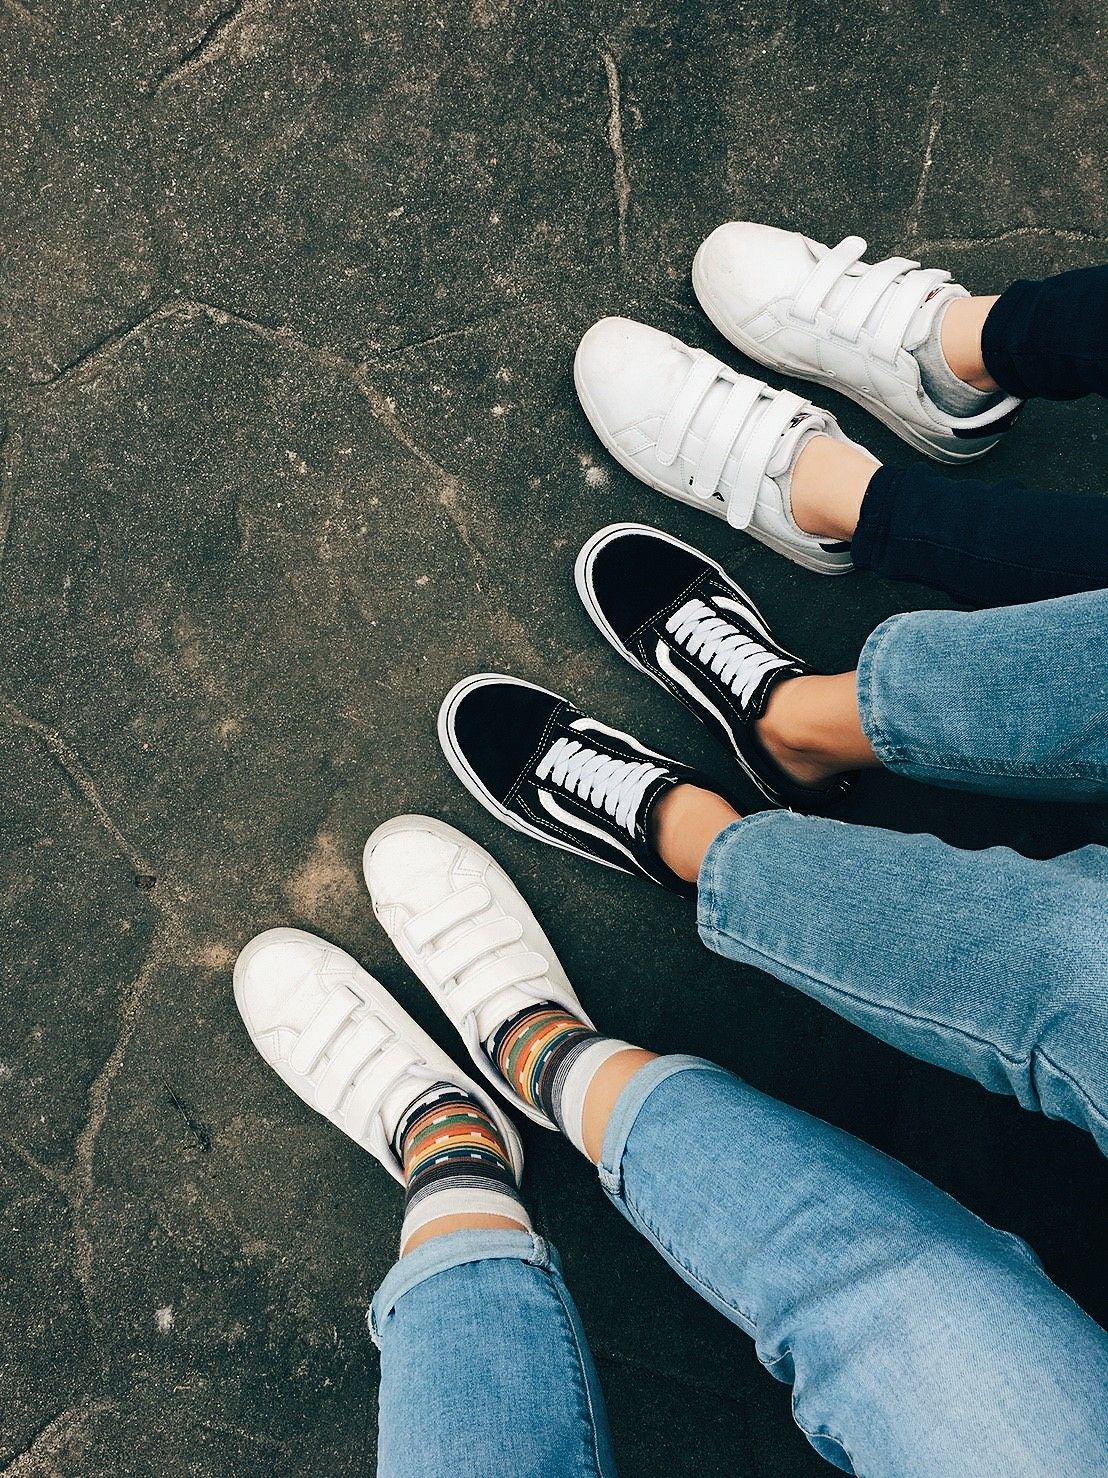 A group of people standing on top each other - Vans